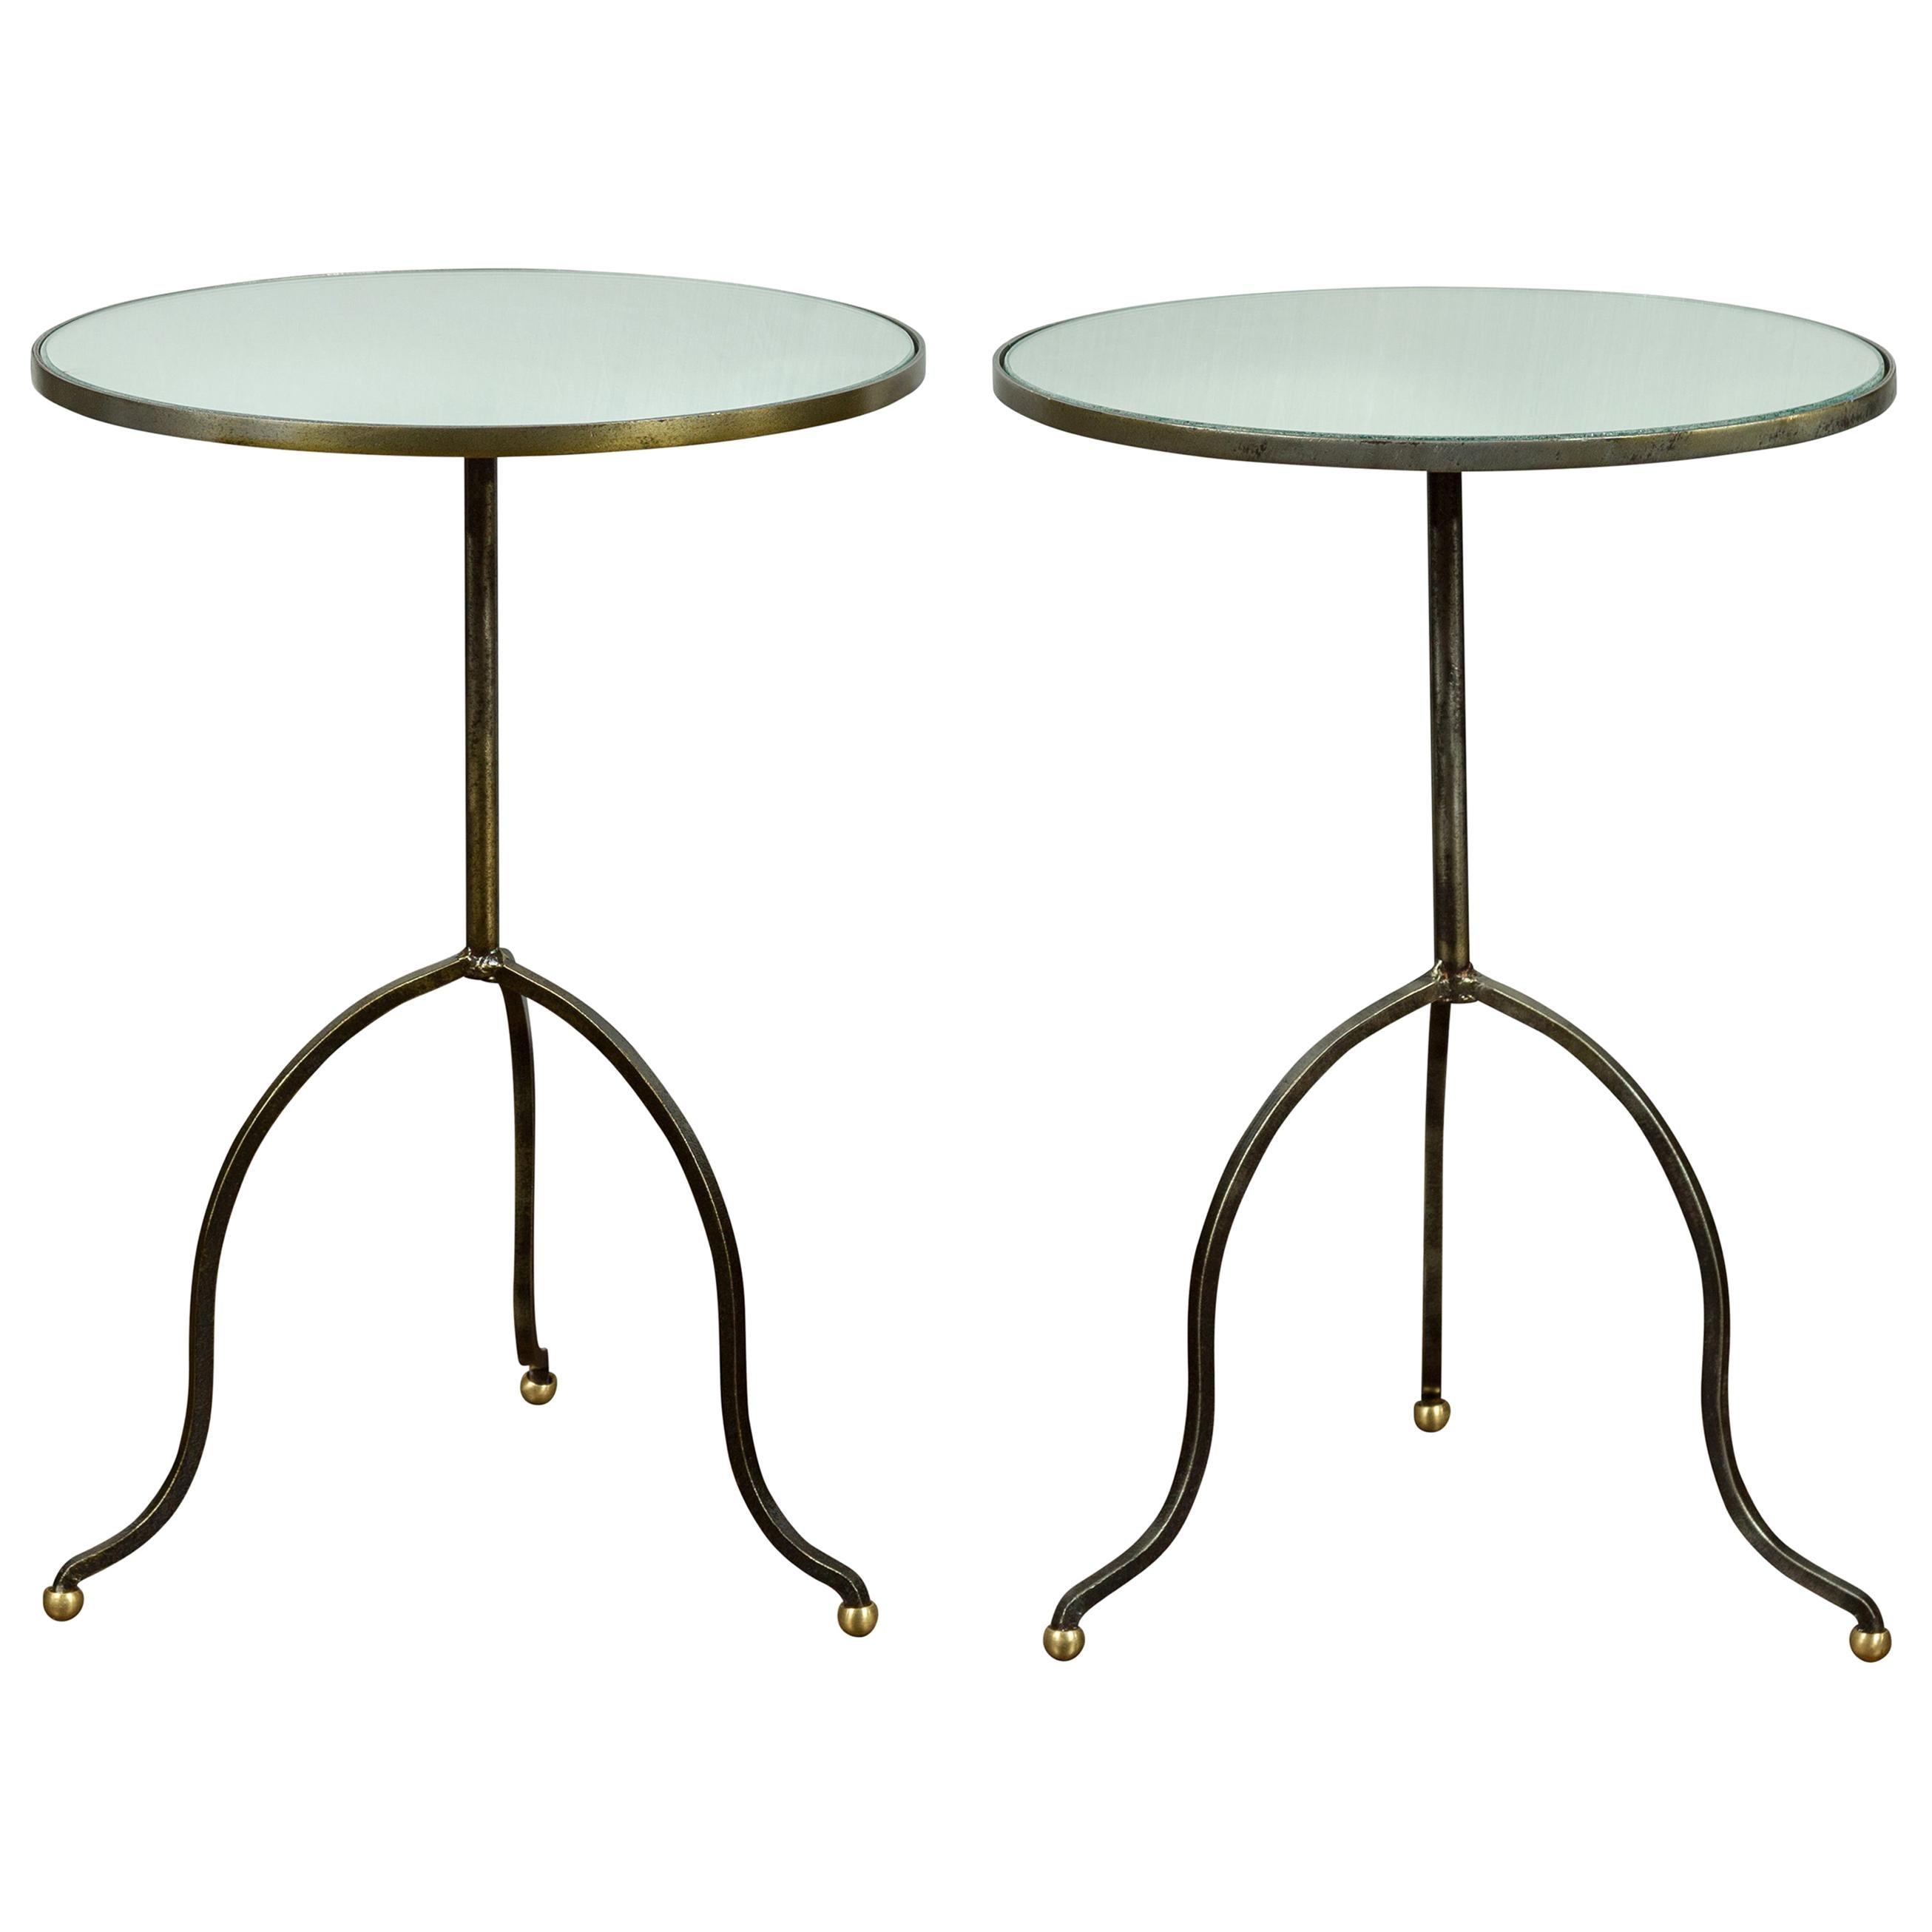 Pair of French Midcentury Steel Tripod Side Tables with Circular Mirrored Tops